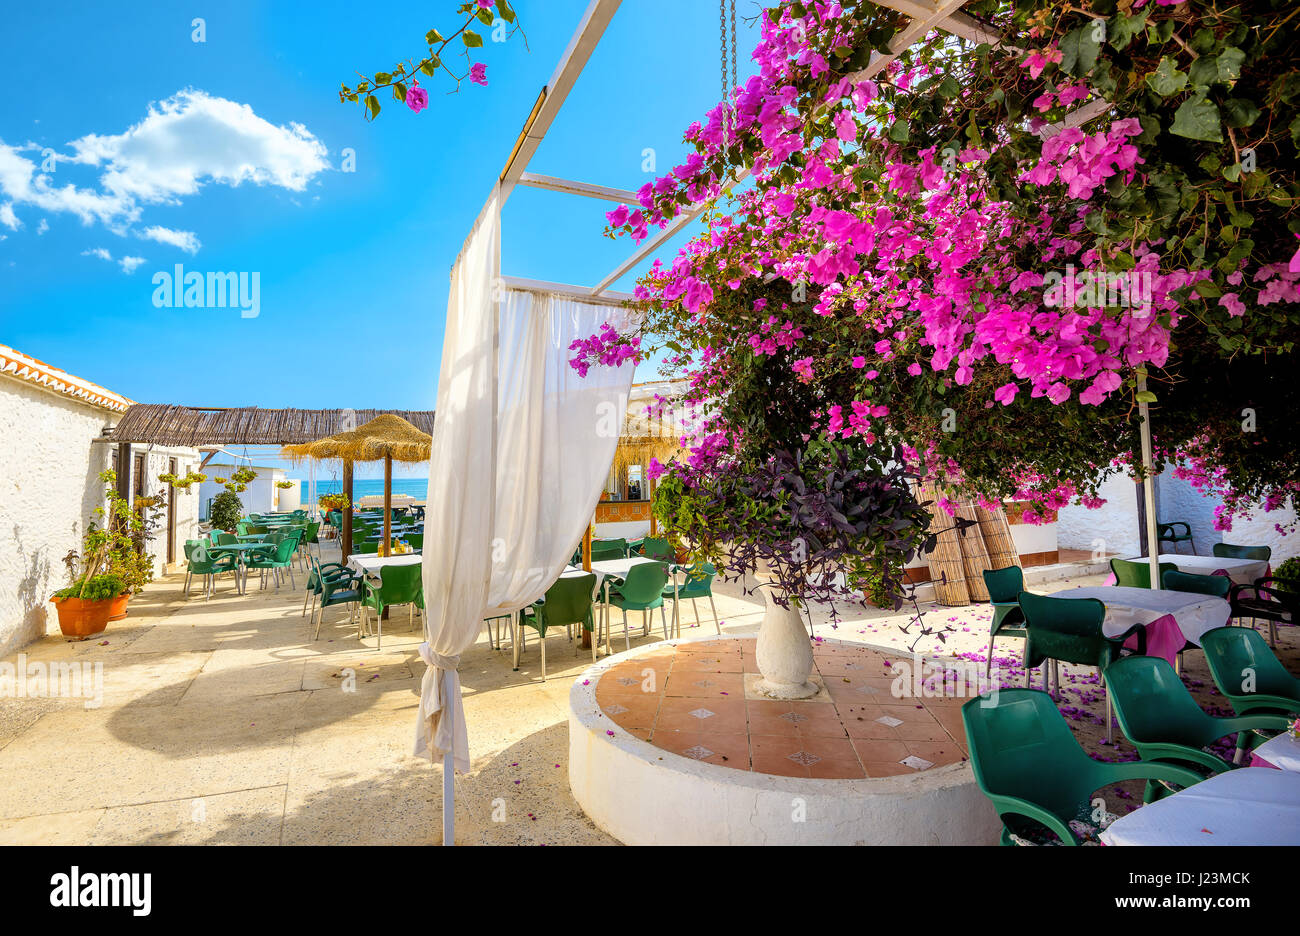 Courtyard of coastal cafe in Torremolinos. Malaga province, Costa del Sol. Andalusia, Spain Stock Photo